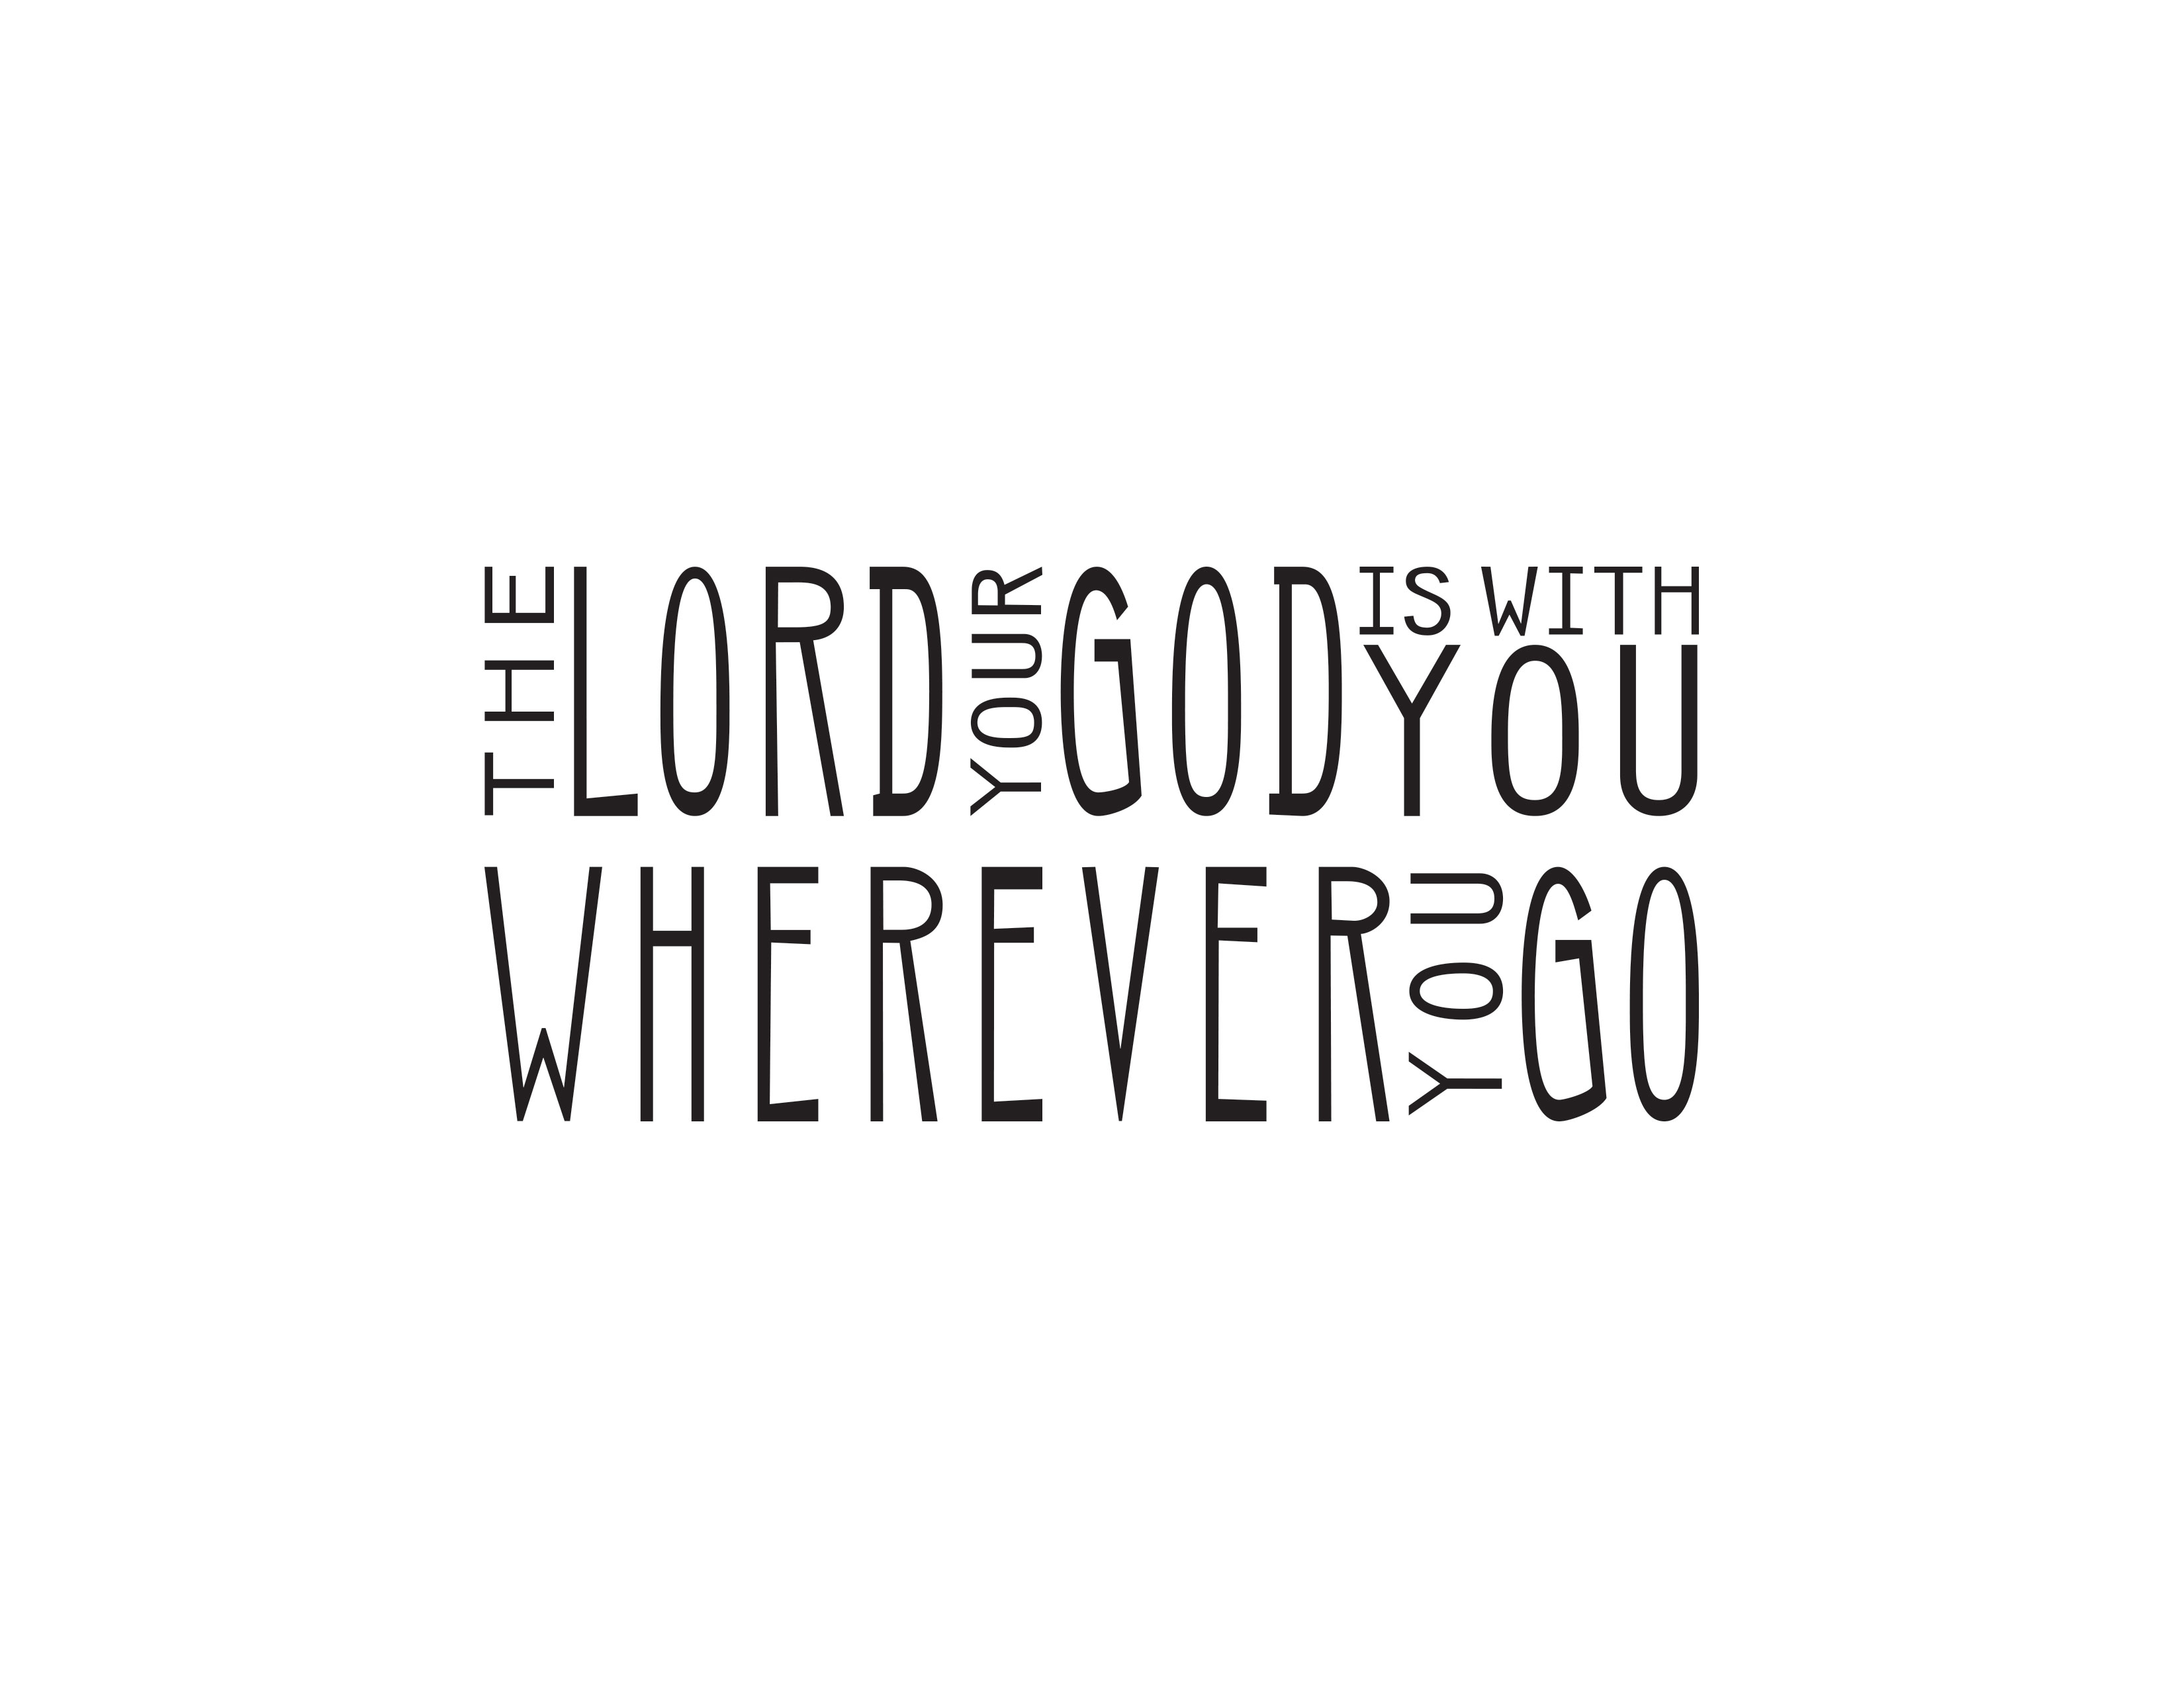 The Lord your God is with you wherever you go